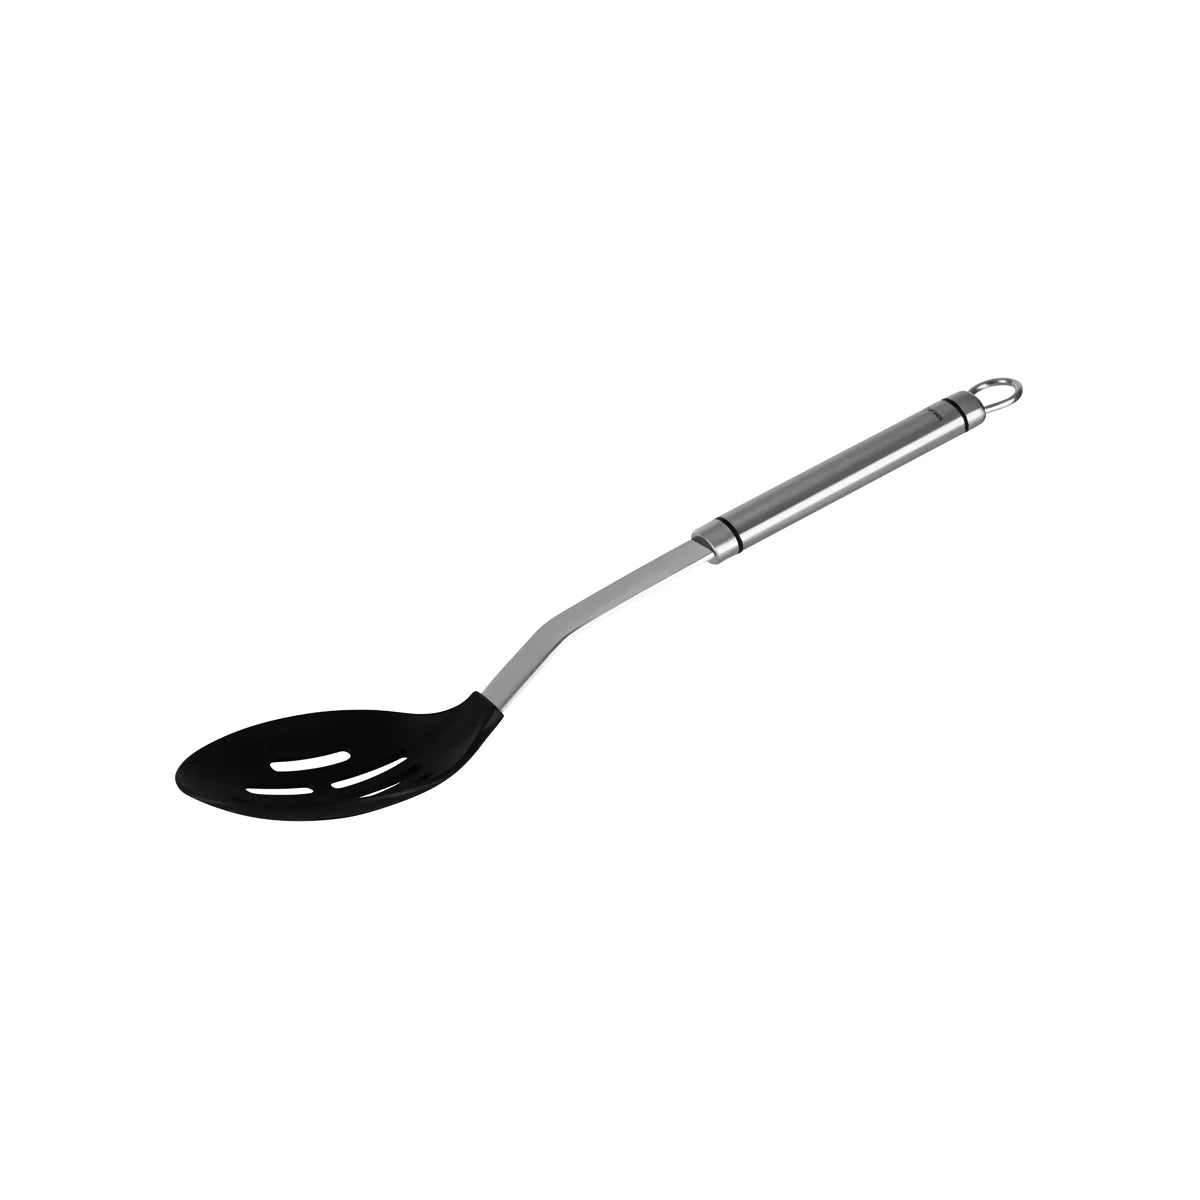 Slotted Spoon Non Stick with Steel handle